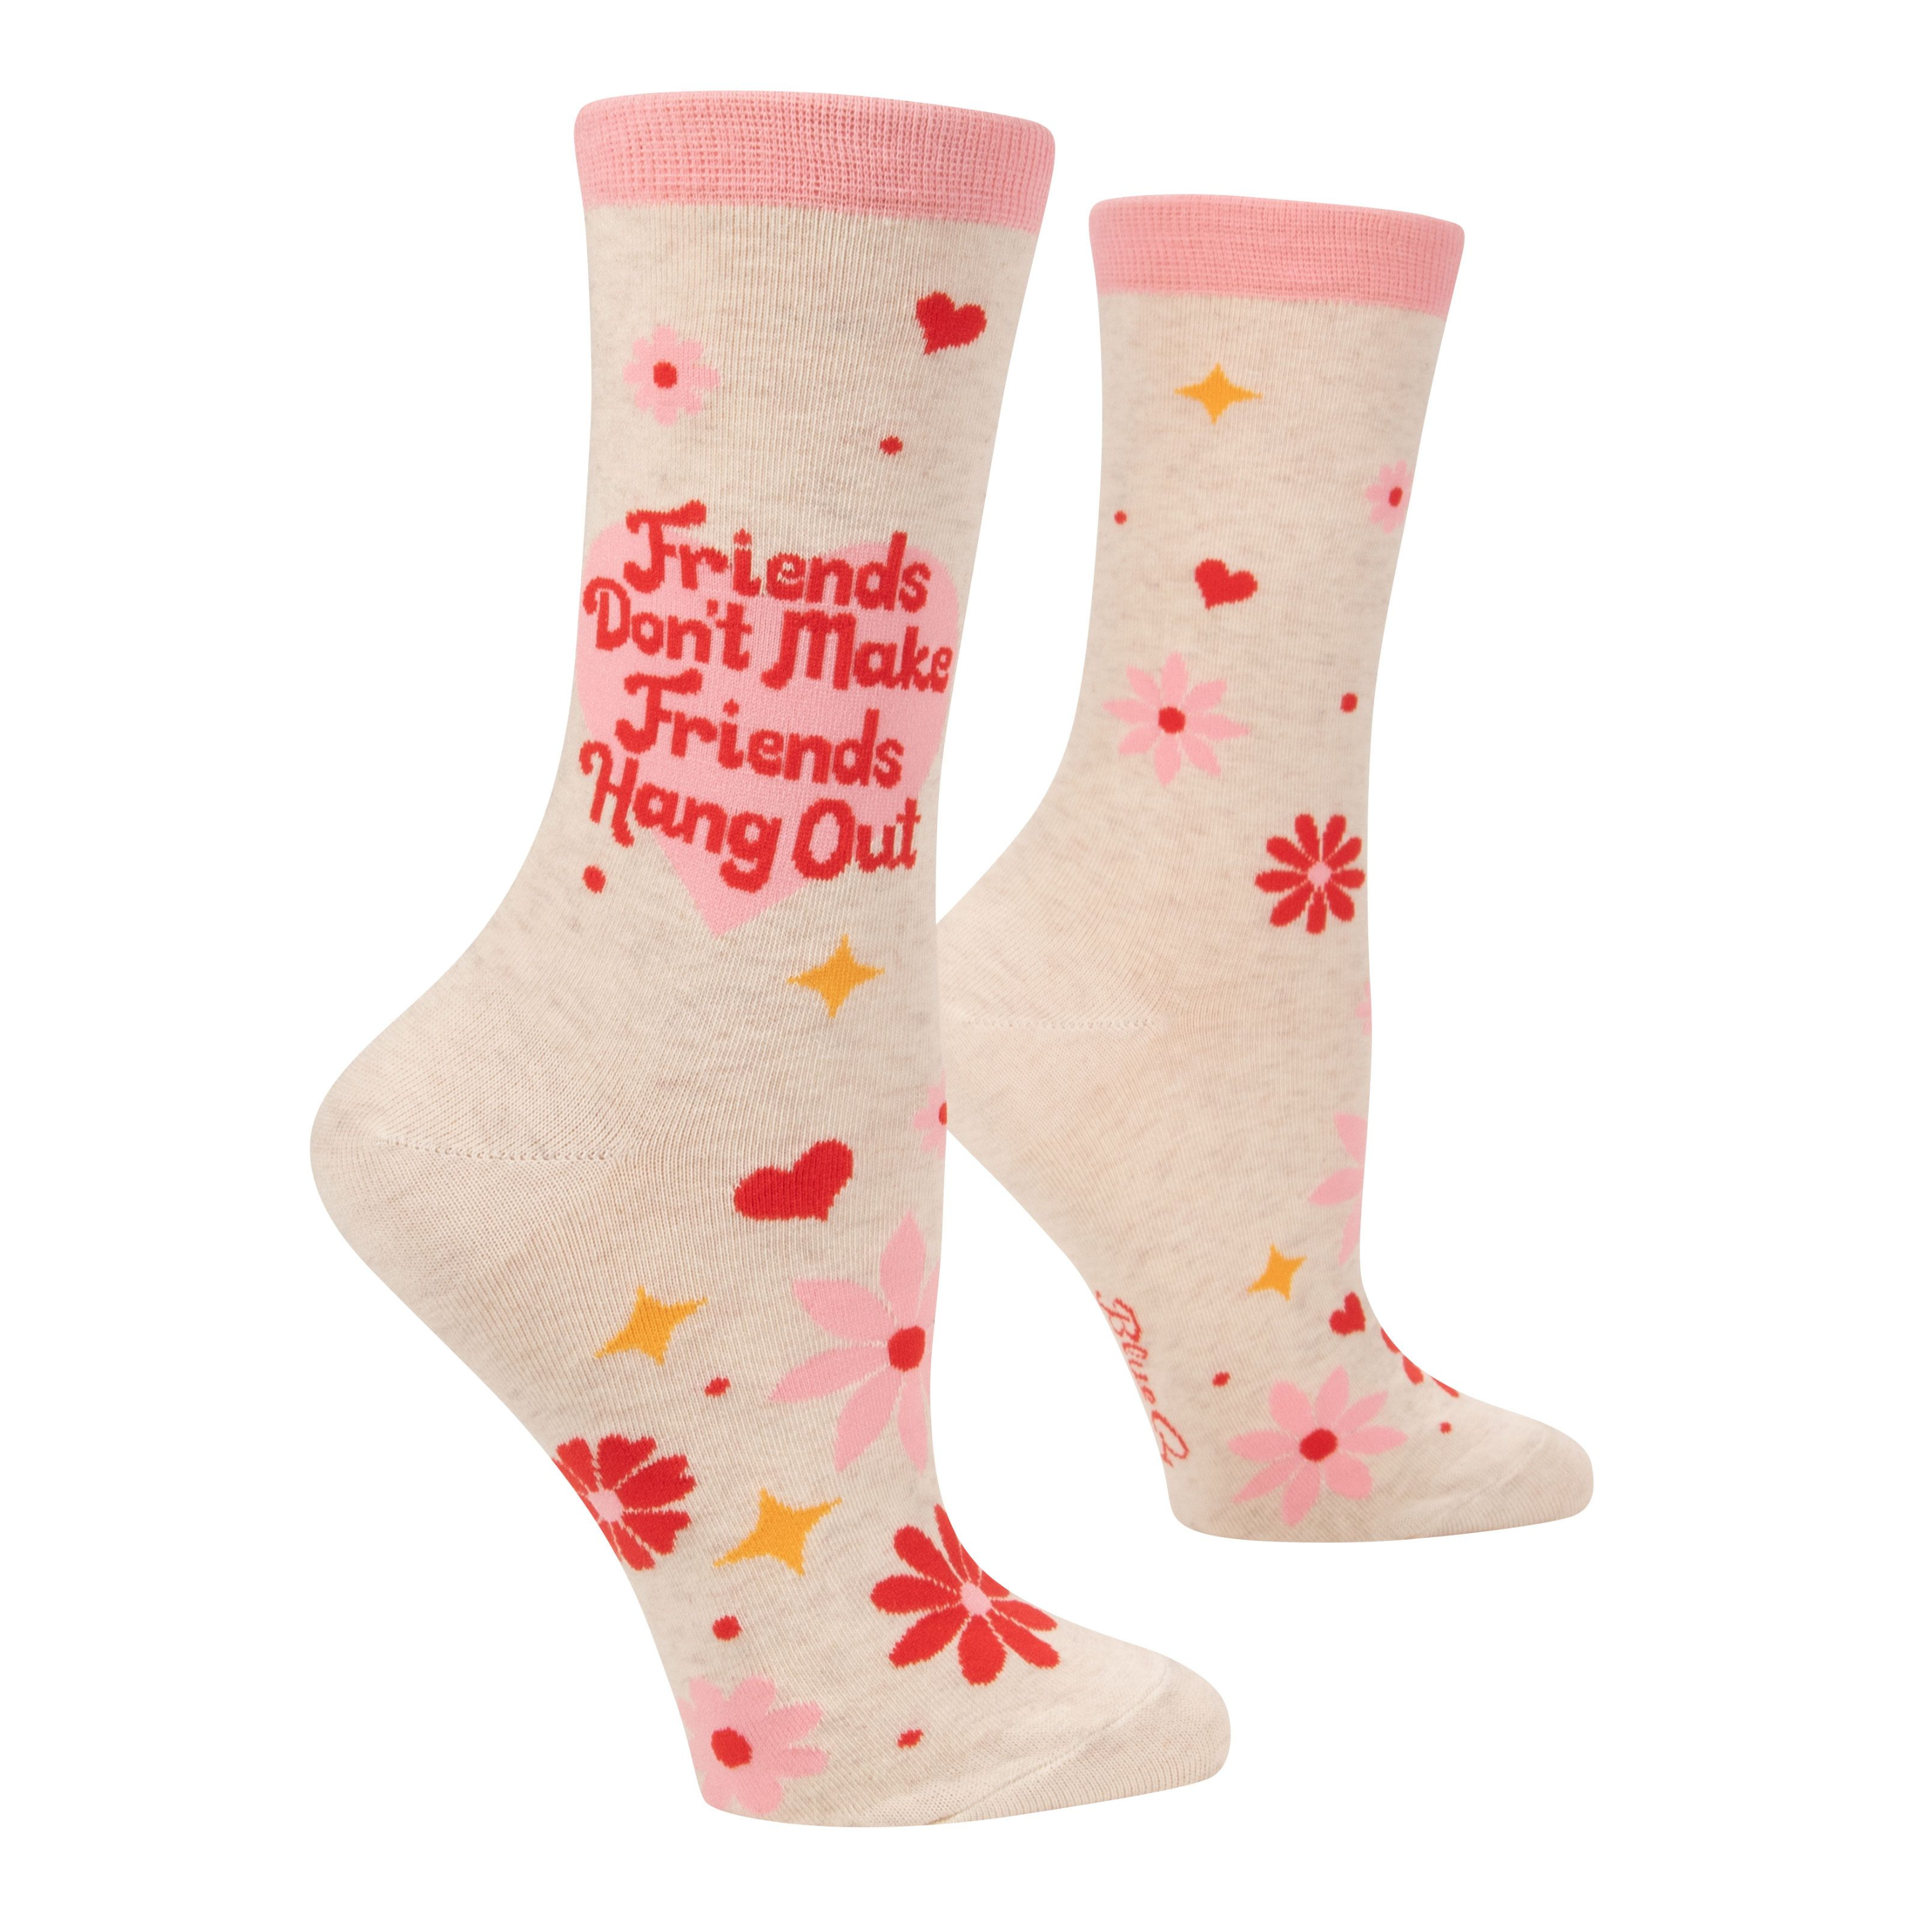 cream socks with pink red and yellow flowers stars and hearts on ankle in pink heart it says friends don't make friends hang out